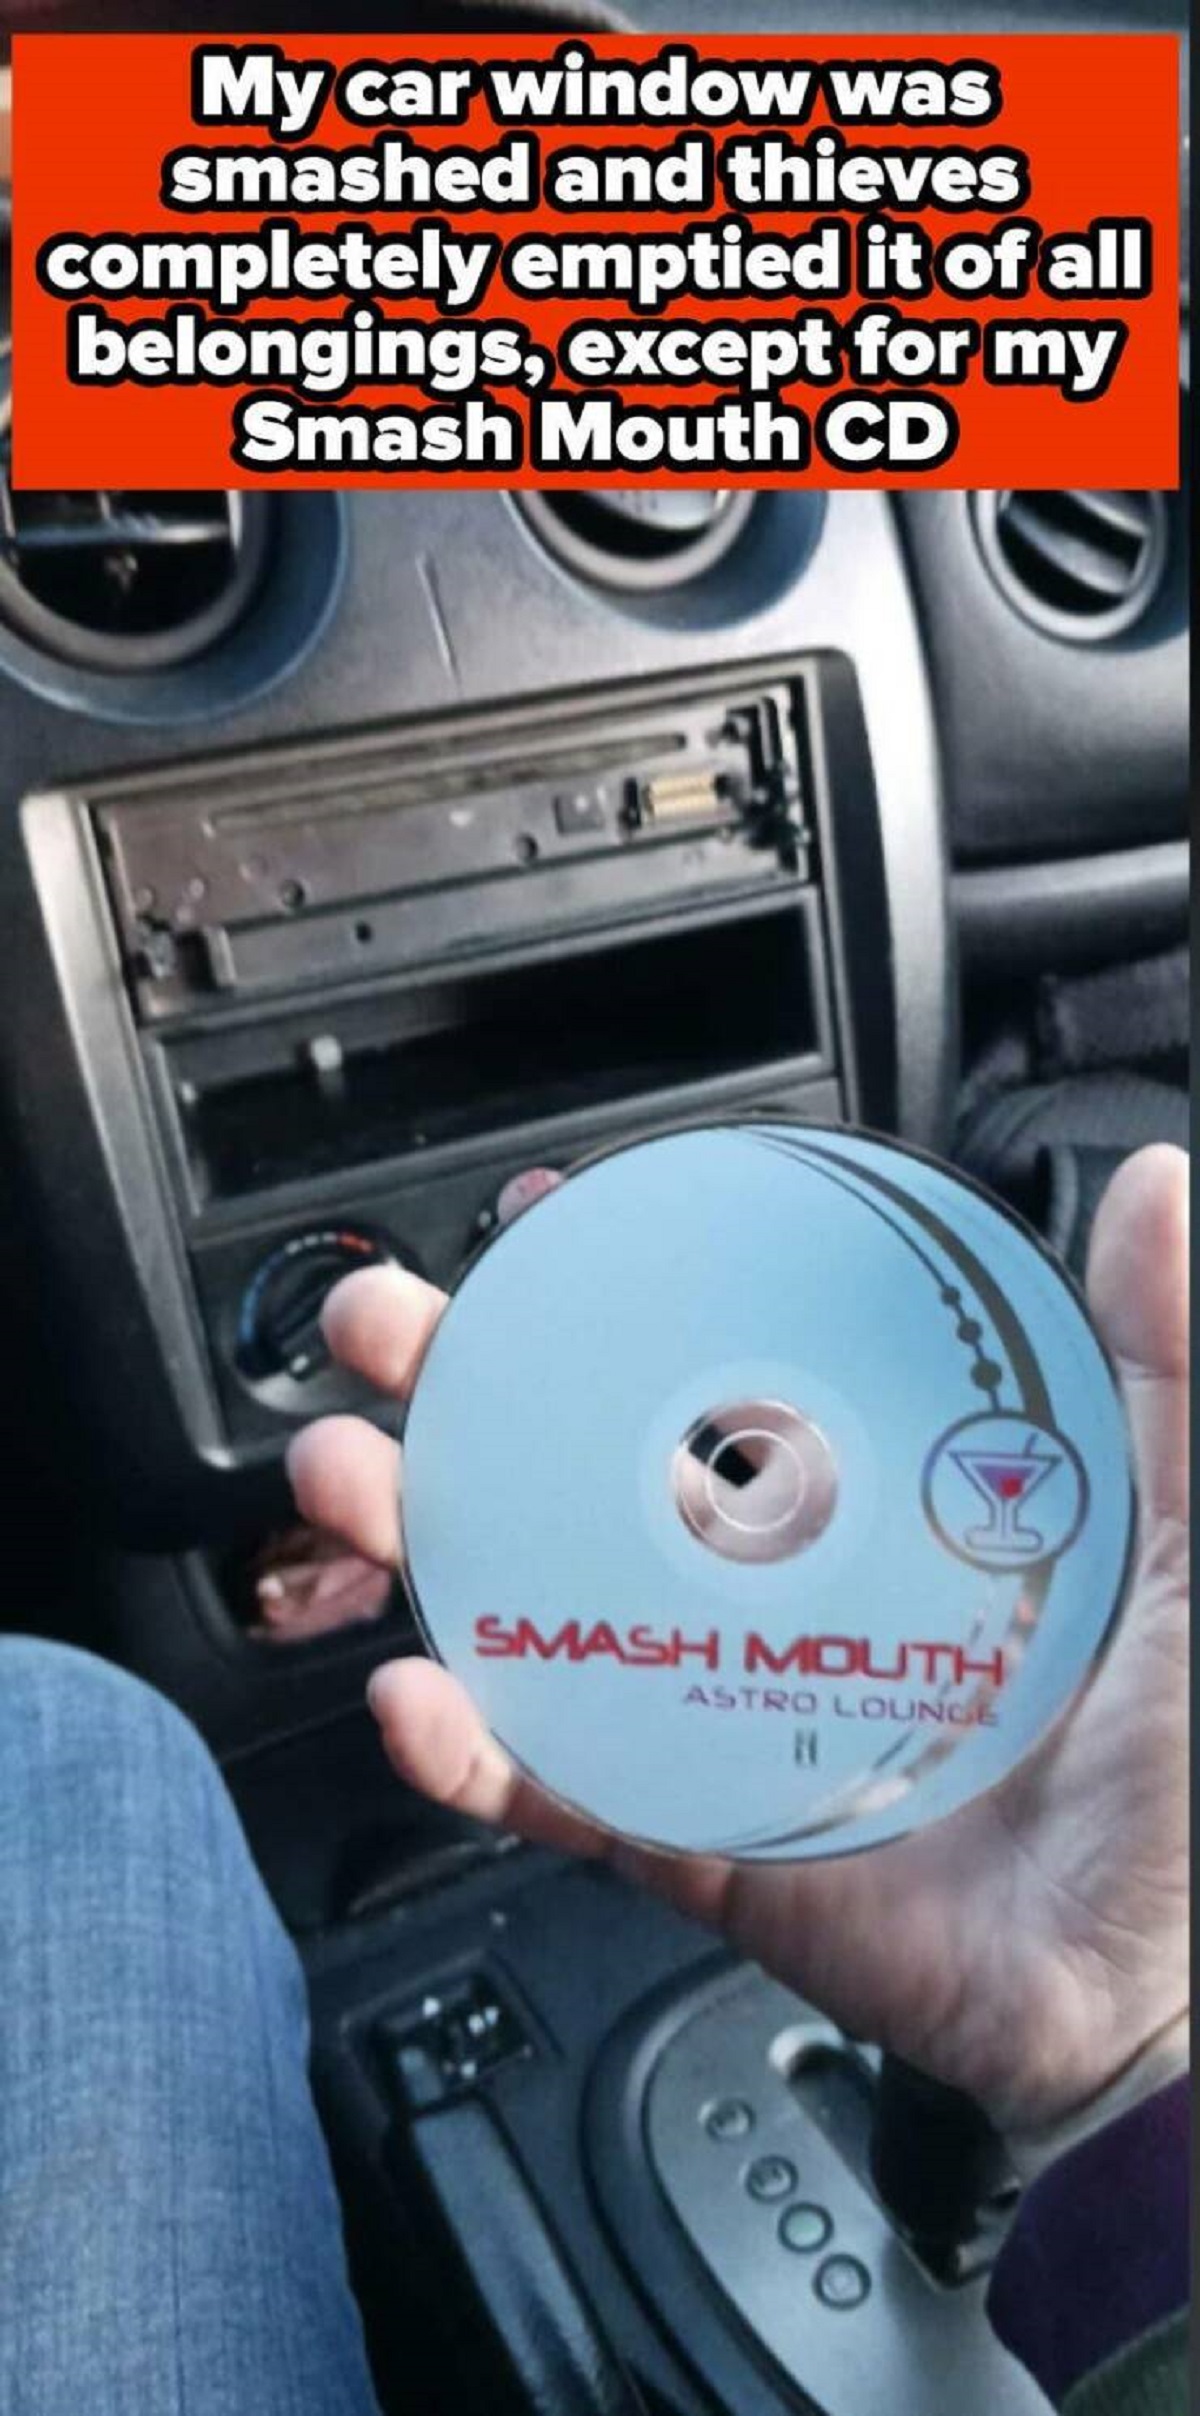 peugeot pars - My car window was smashed and thieves completely emptied it of all belongings, except for my Smash Mouth Cd Smash Mouth Astro Loung 0000